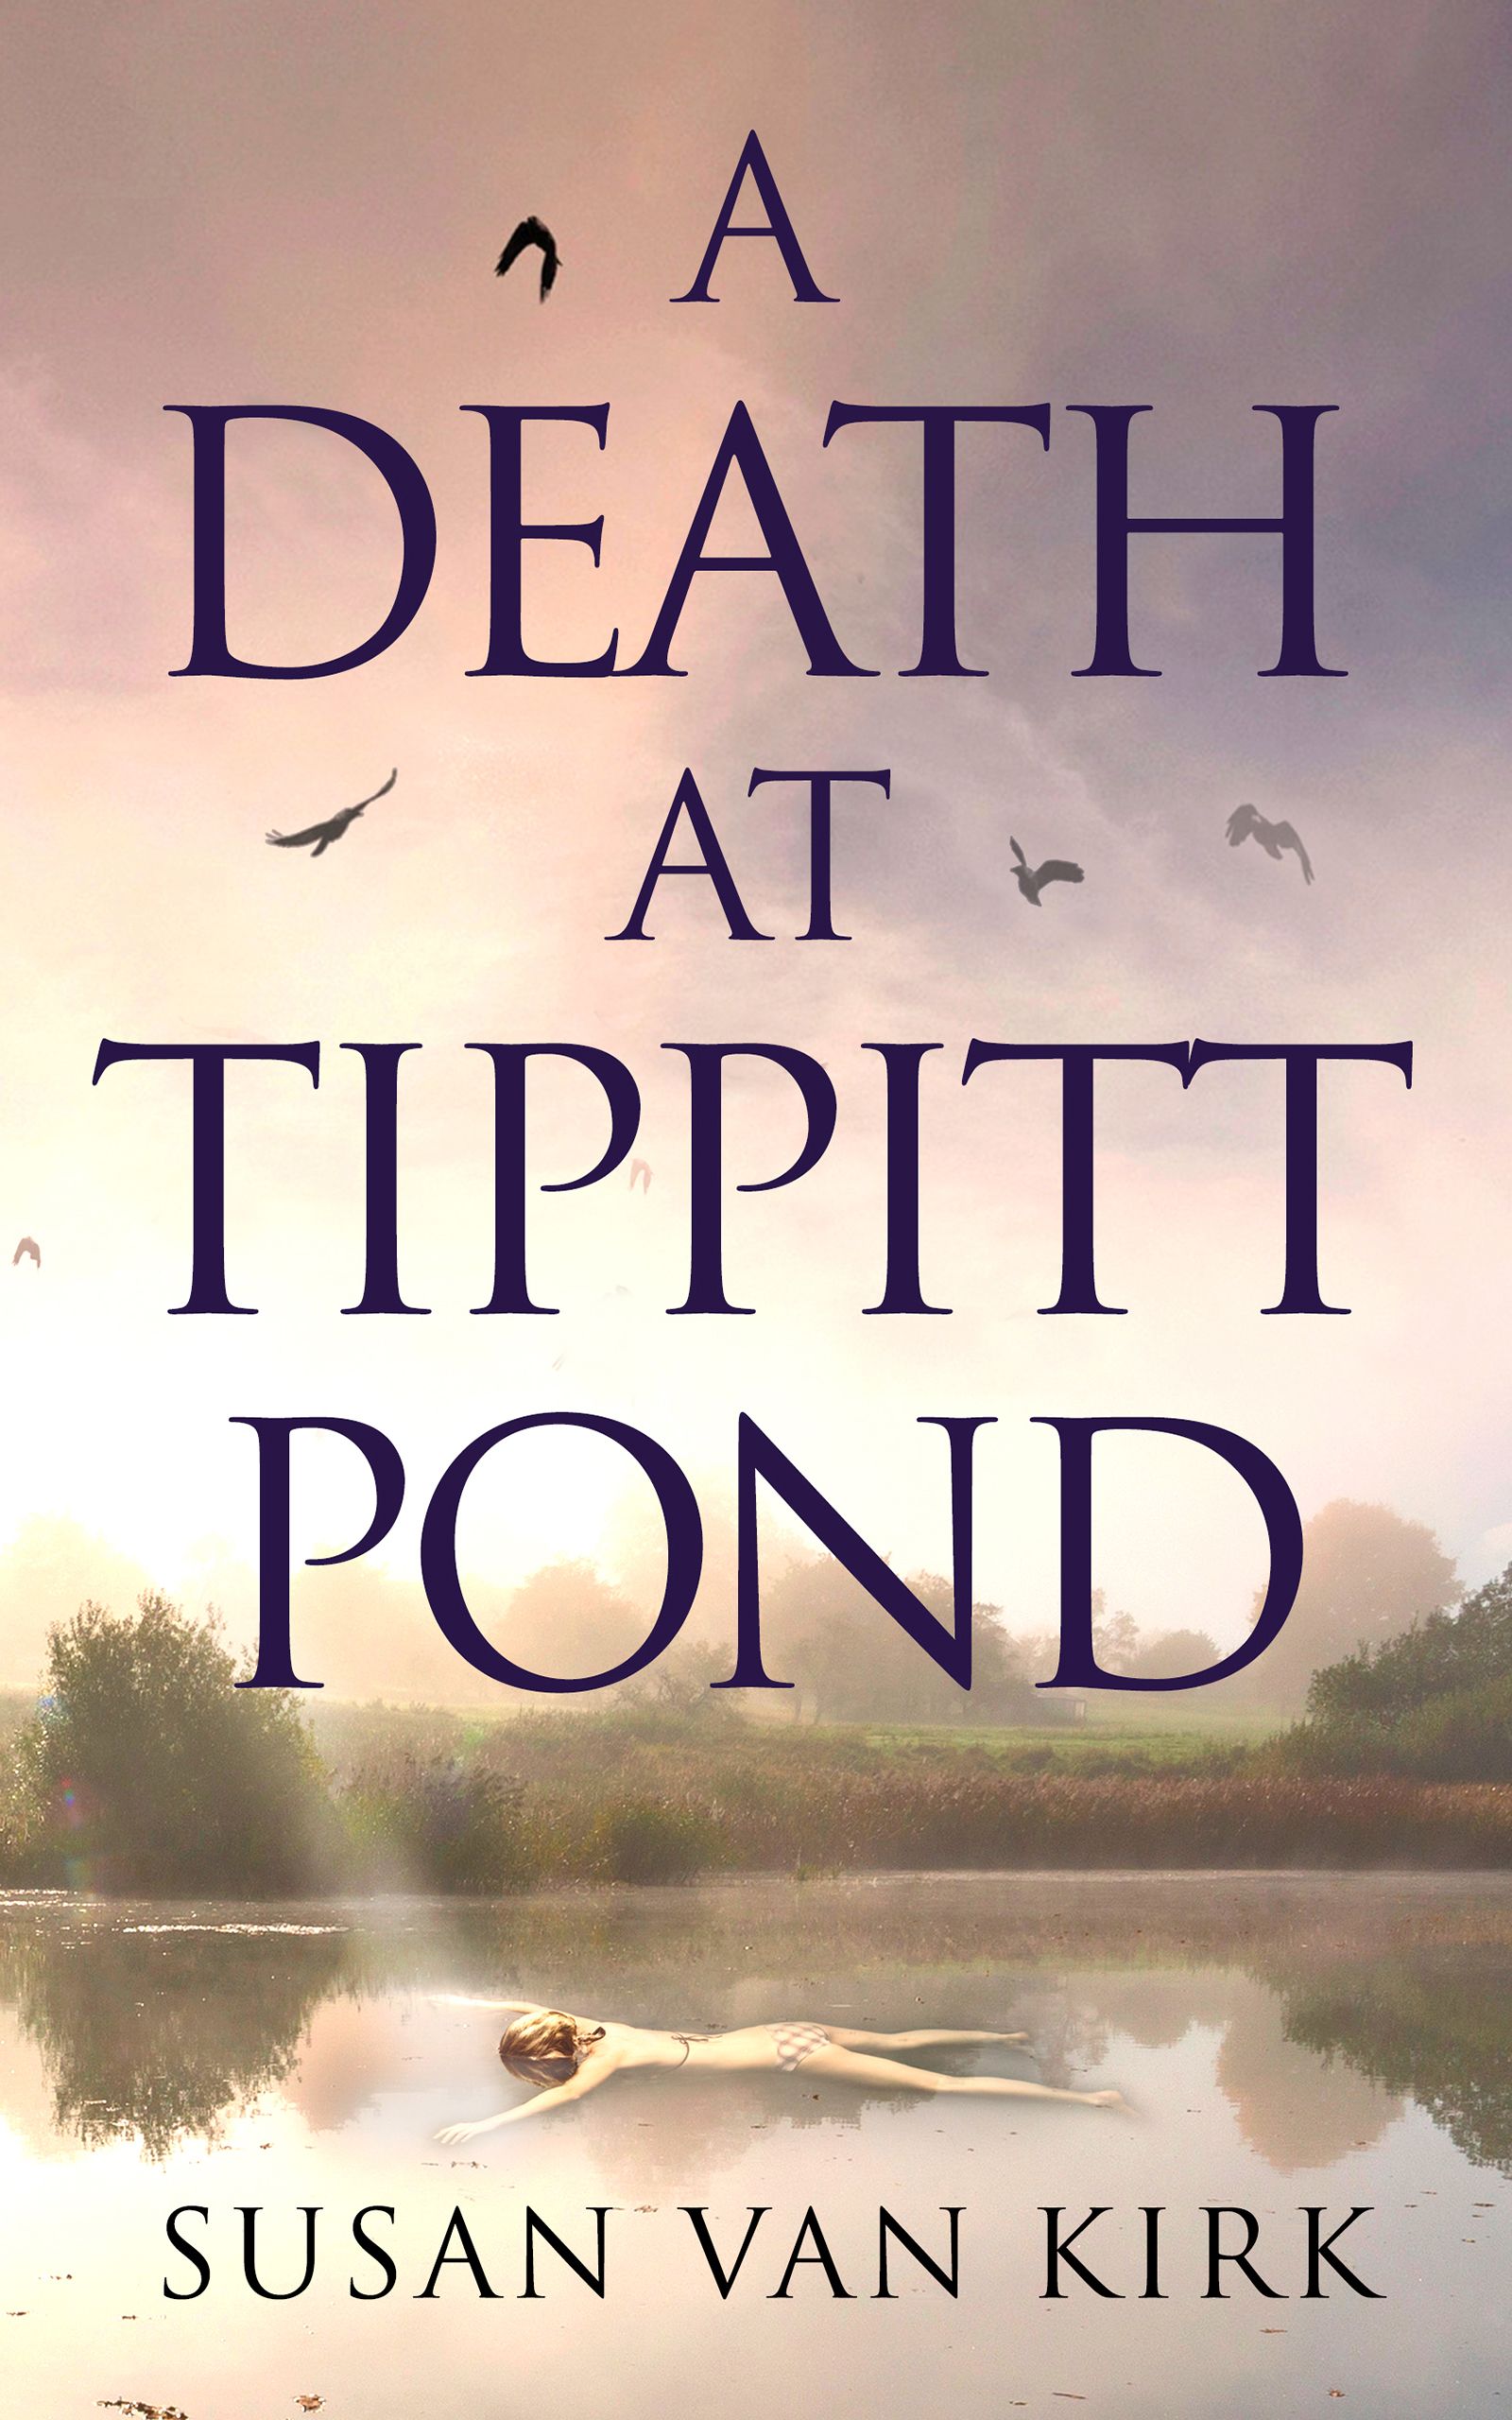 Book cover showing title and author with a still pond at sunset and a body floating face down in the water. 